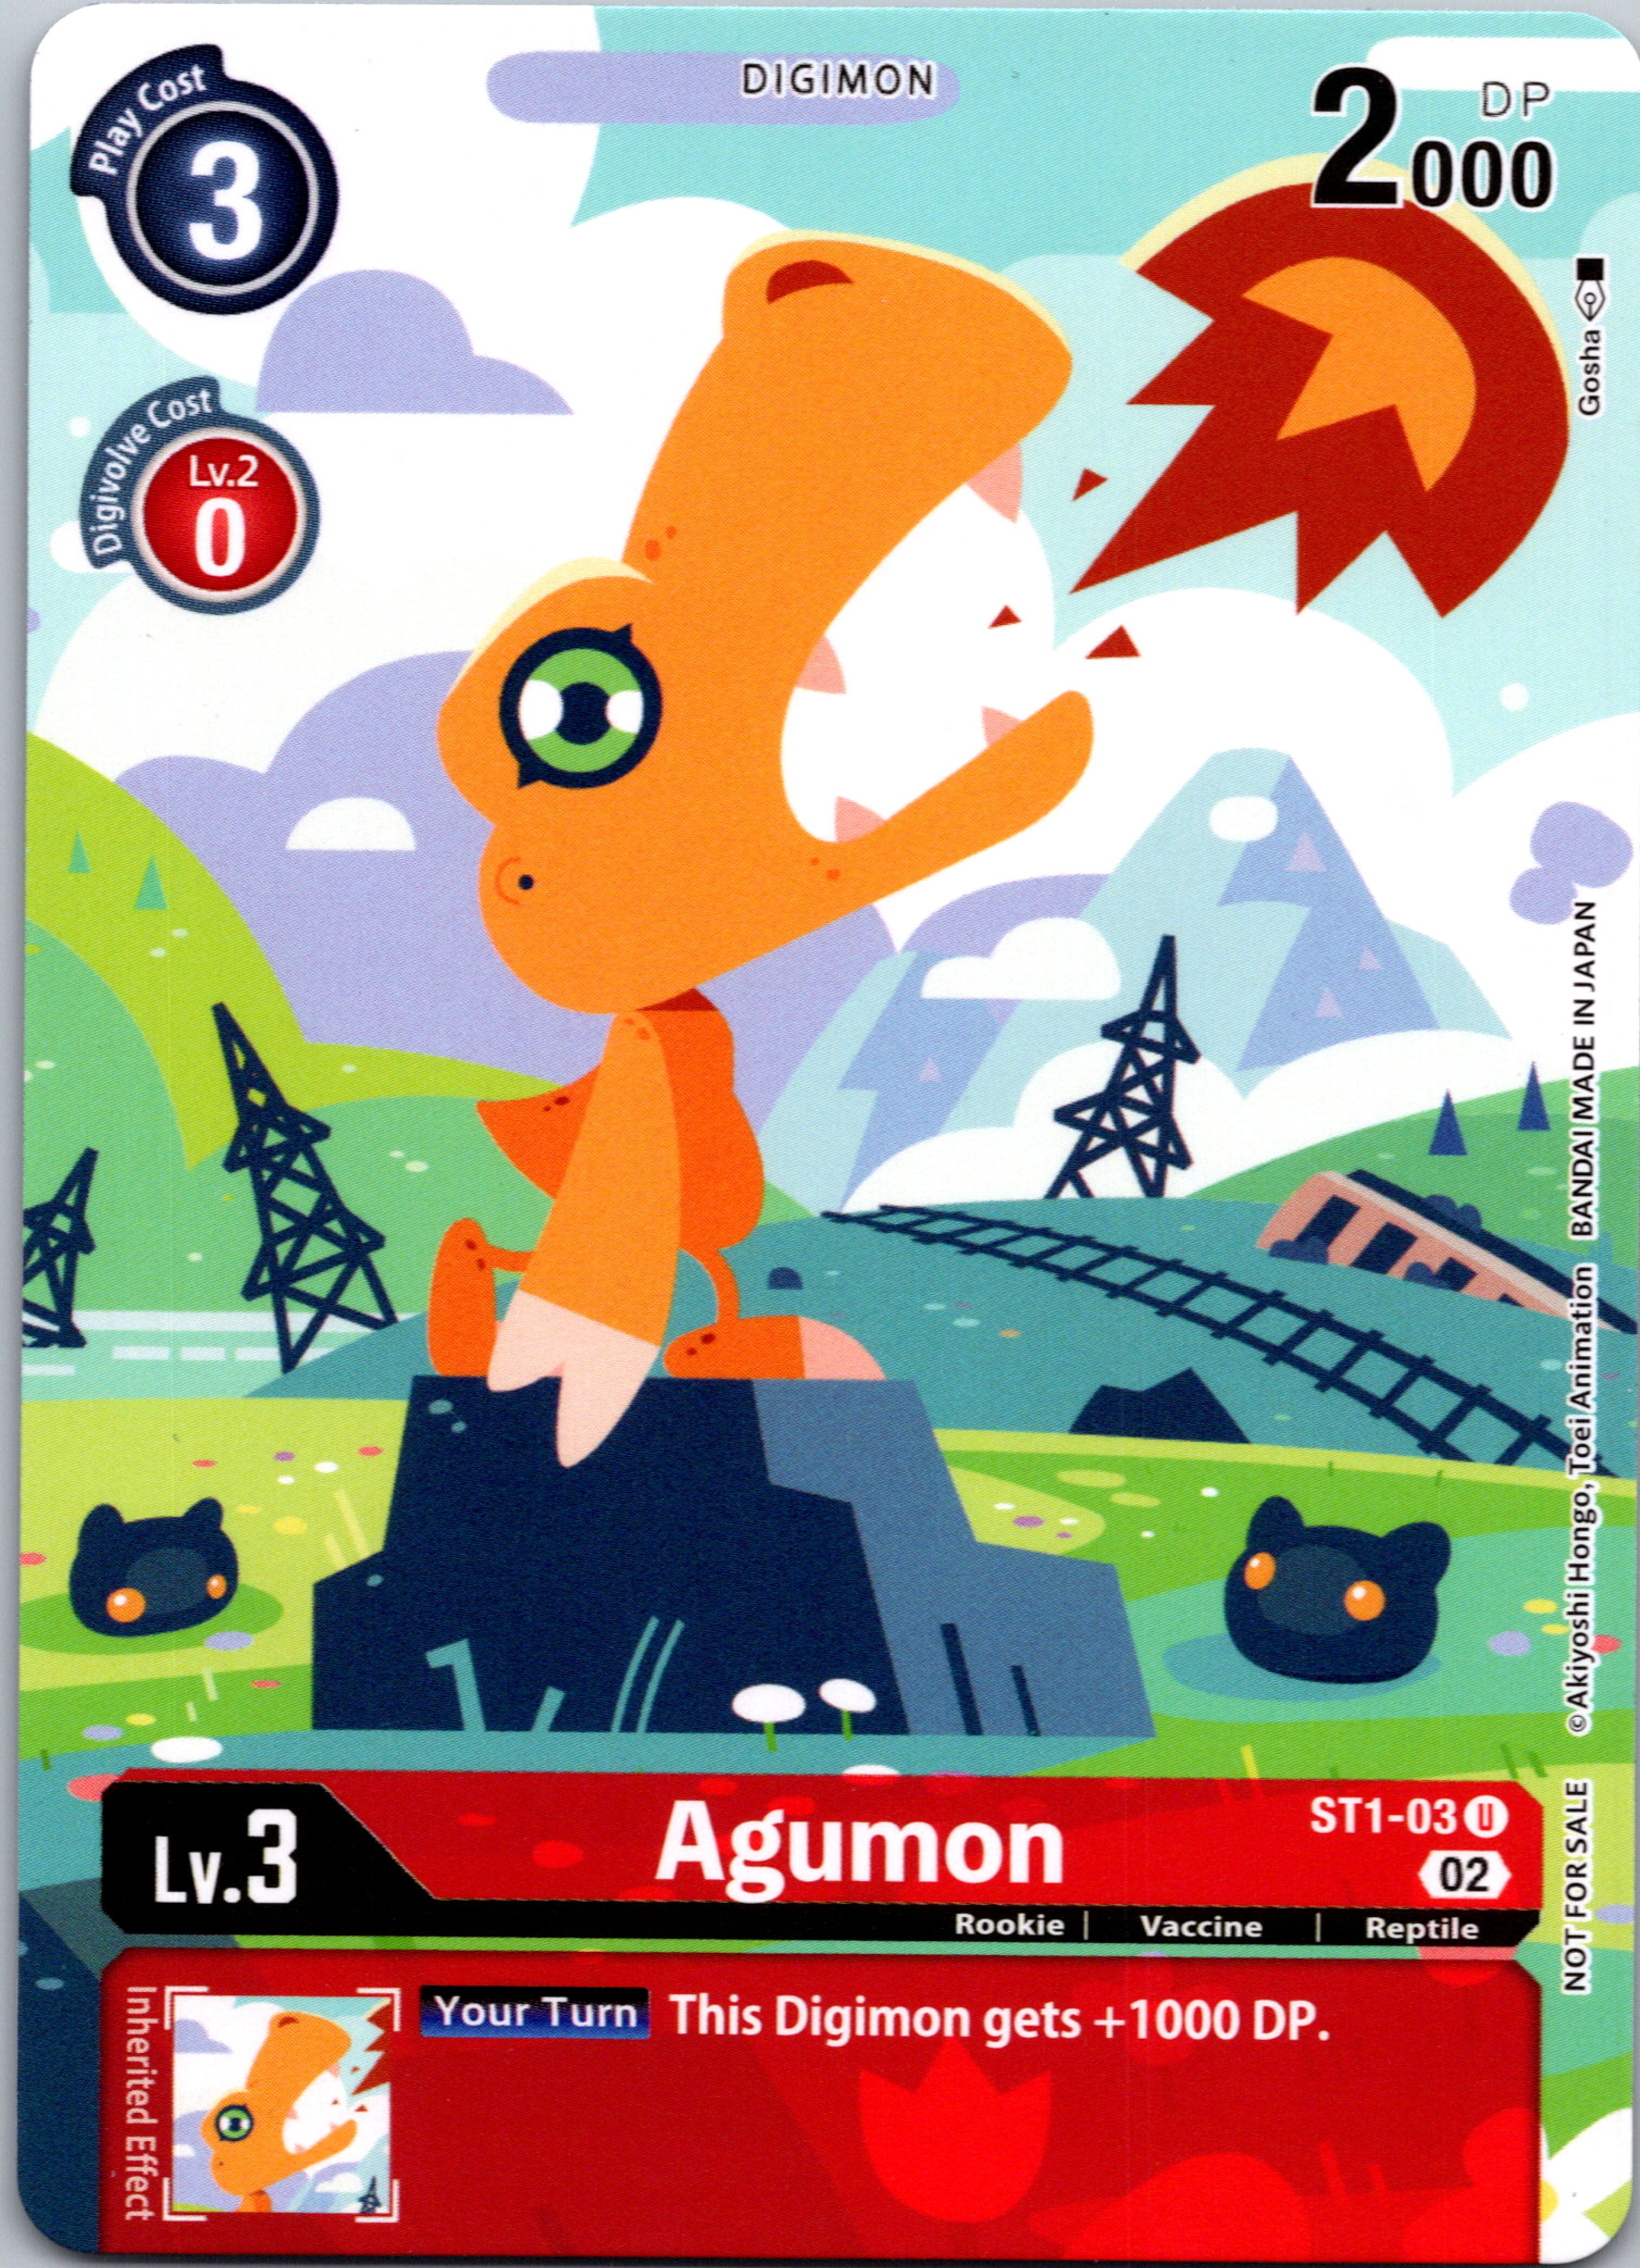 Agumon (Digimon Illustration Competition Pack) [ST1-03] [Dimensional Phase] Normal